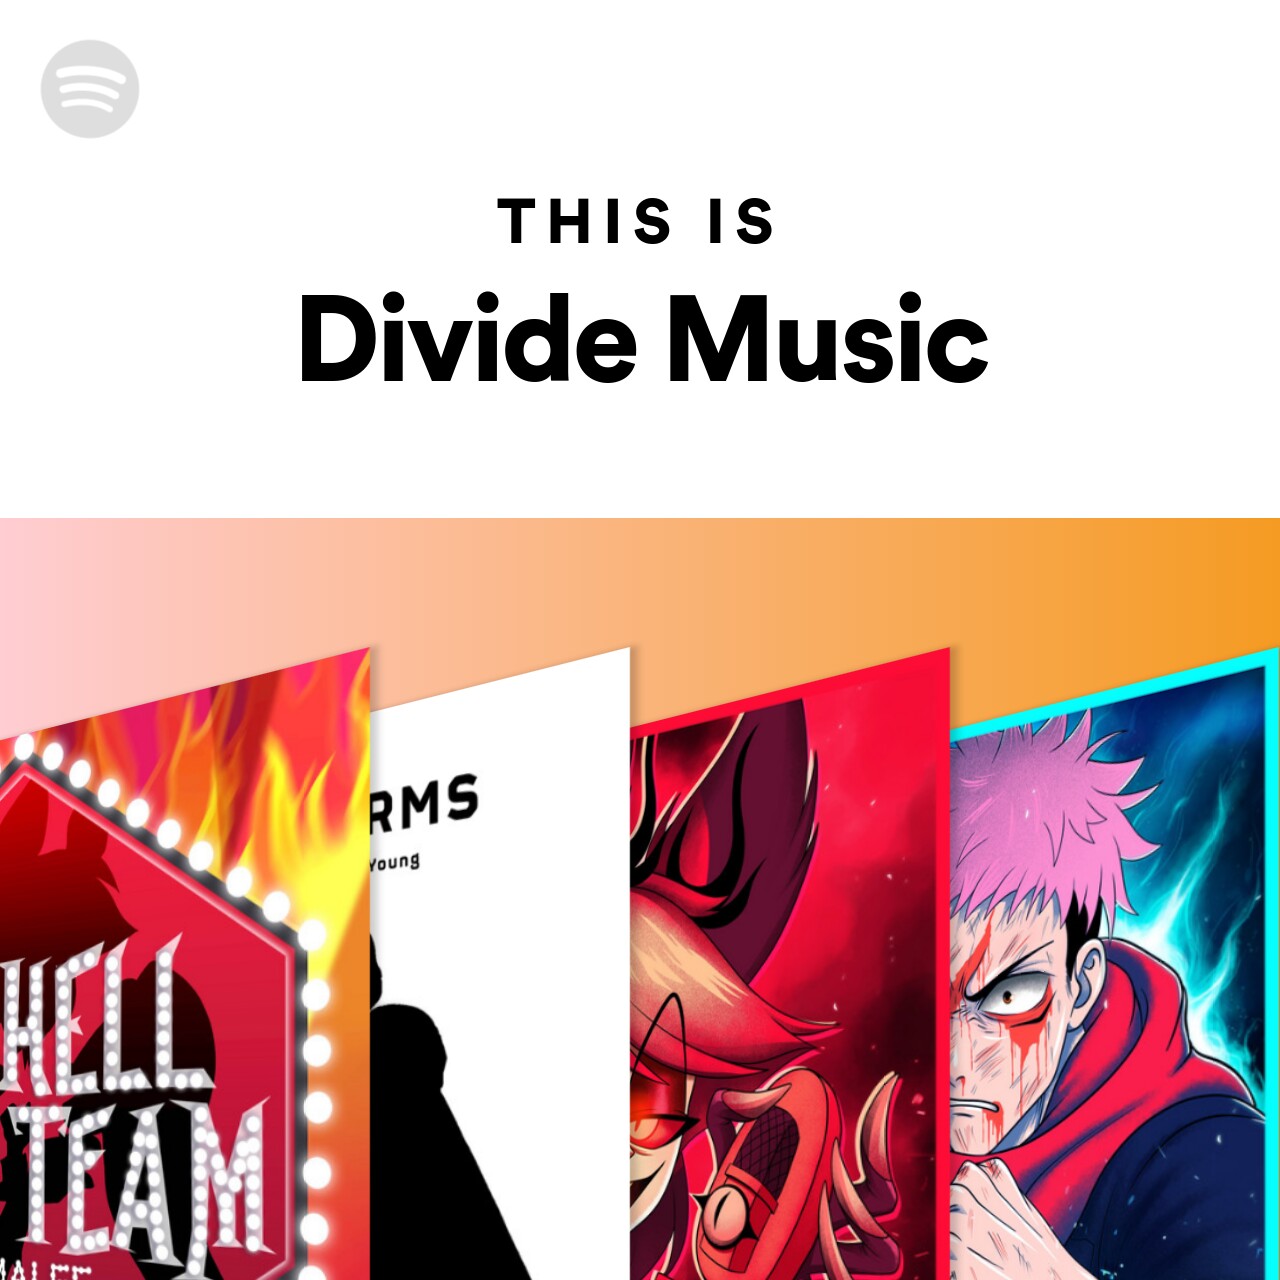 This Is Divide Music